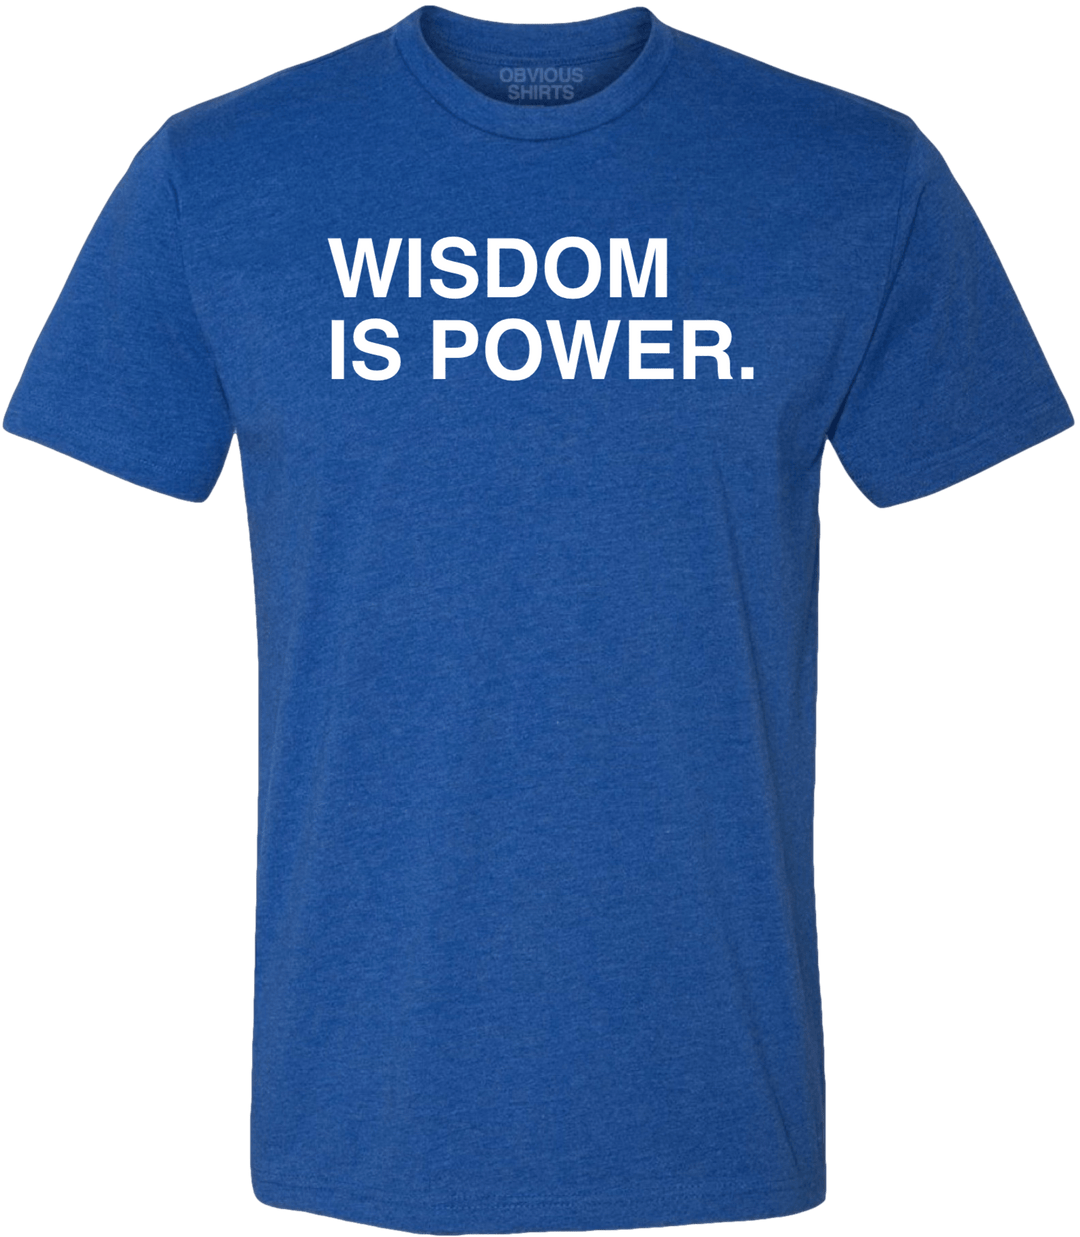 WISDOM IS POWER. (100% DONATED) - OBVIOUS SHIRTS